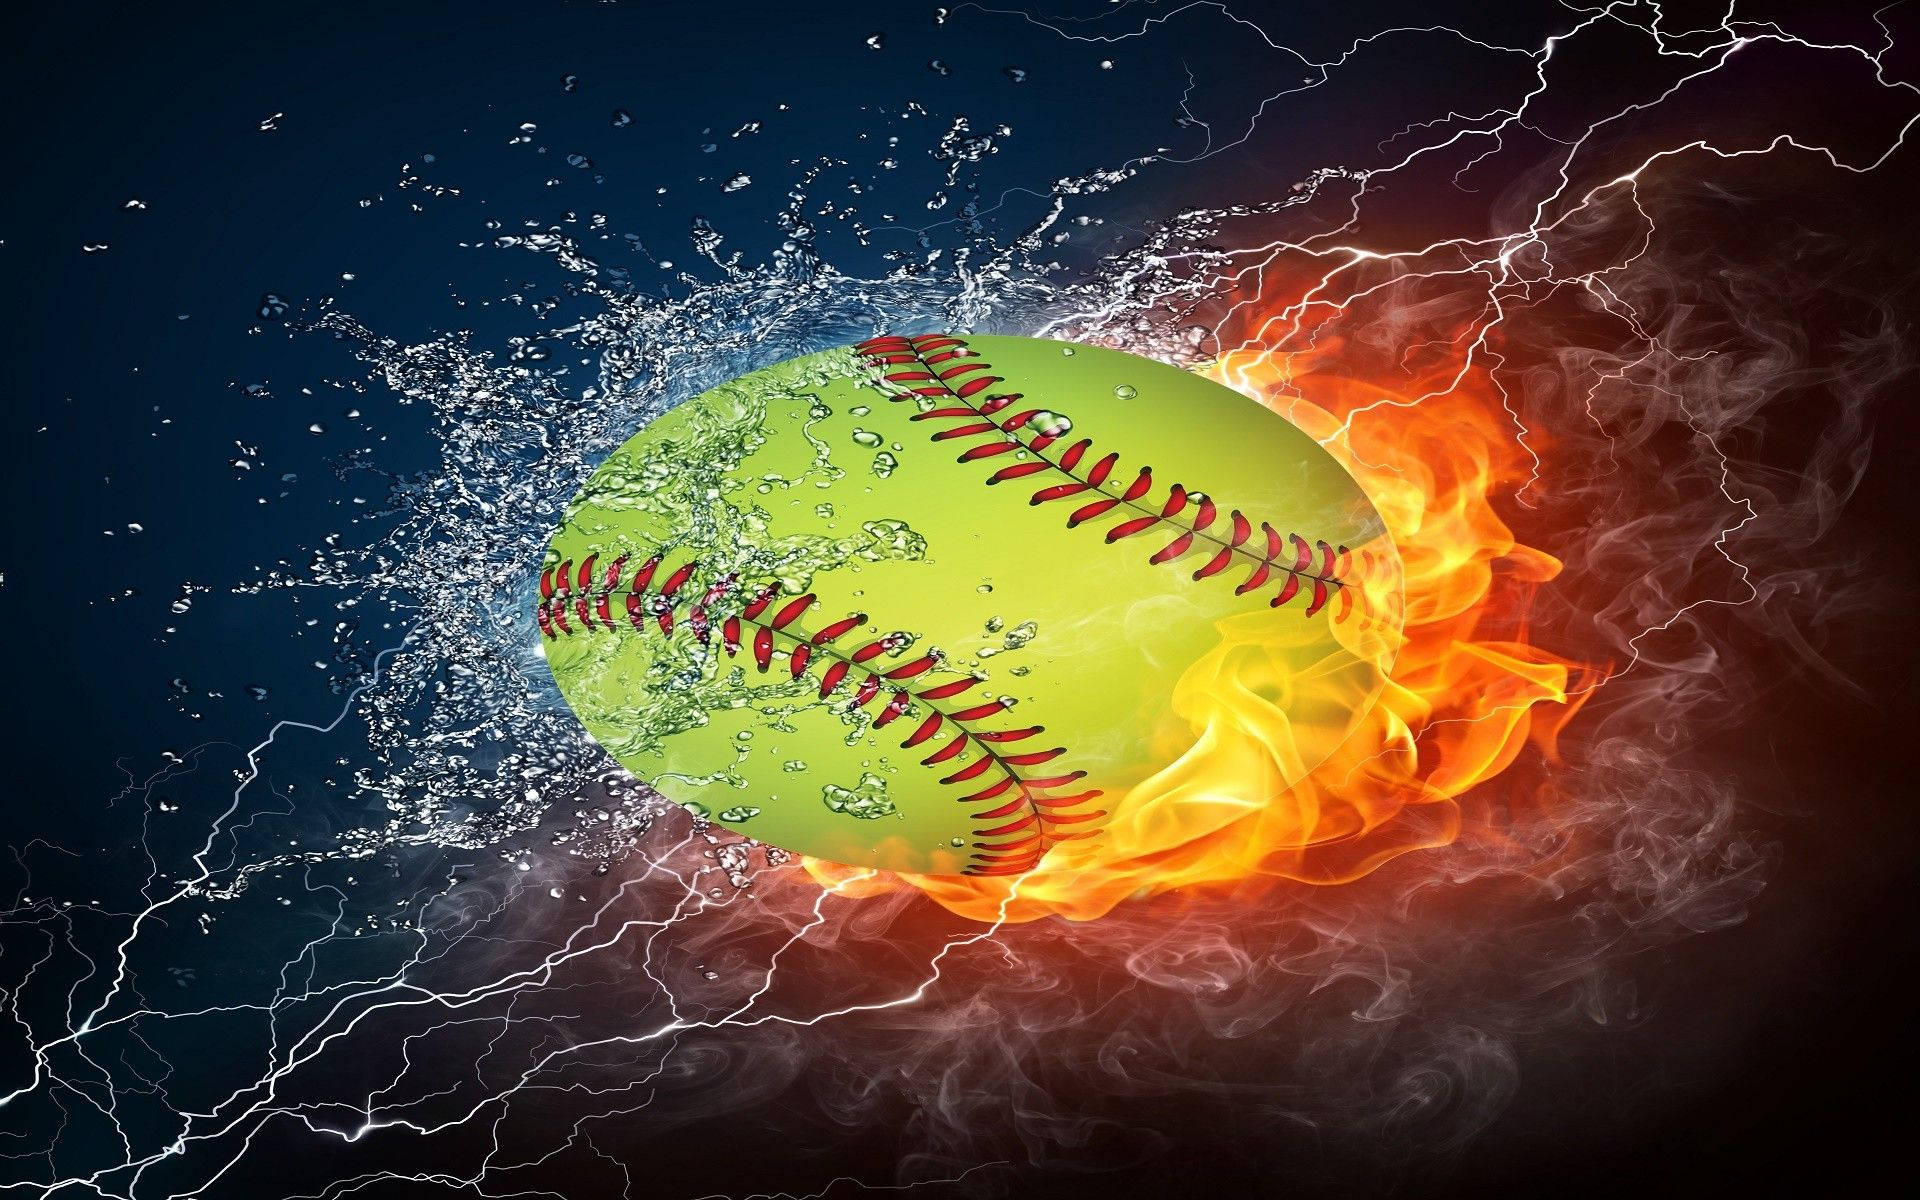 Softball With Fire And Water Effect Wallpaper